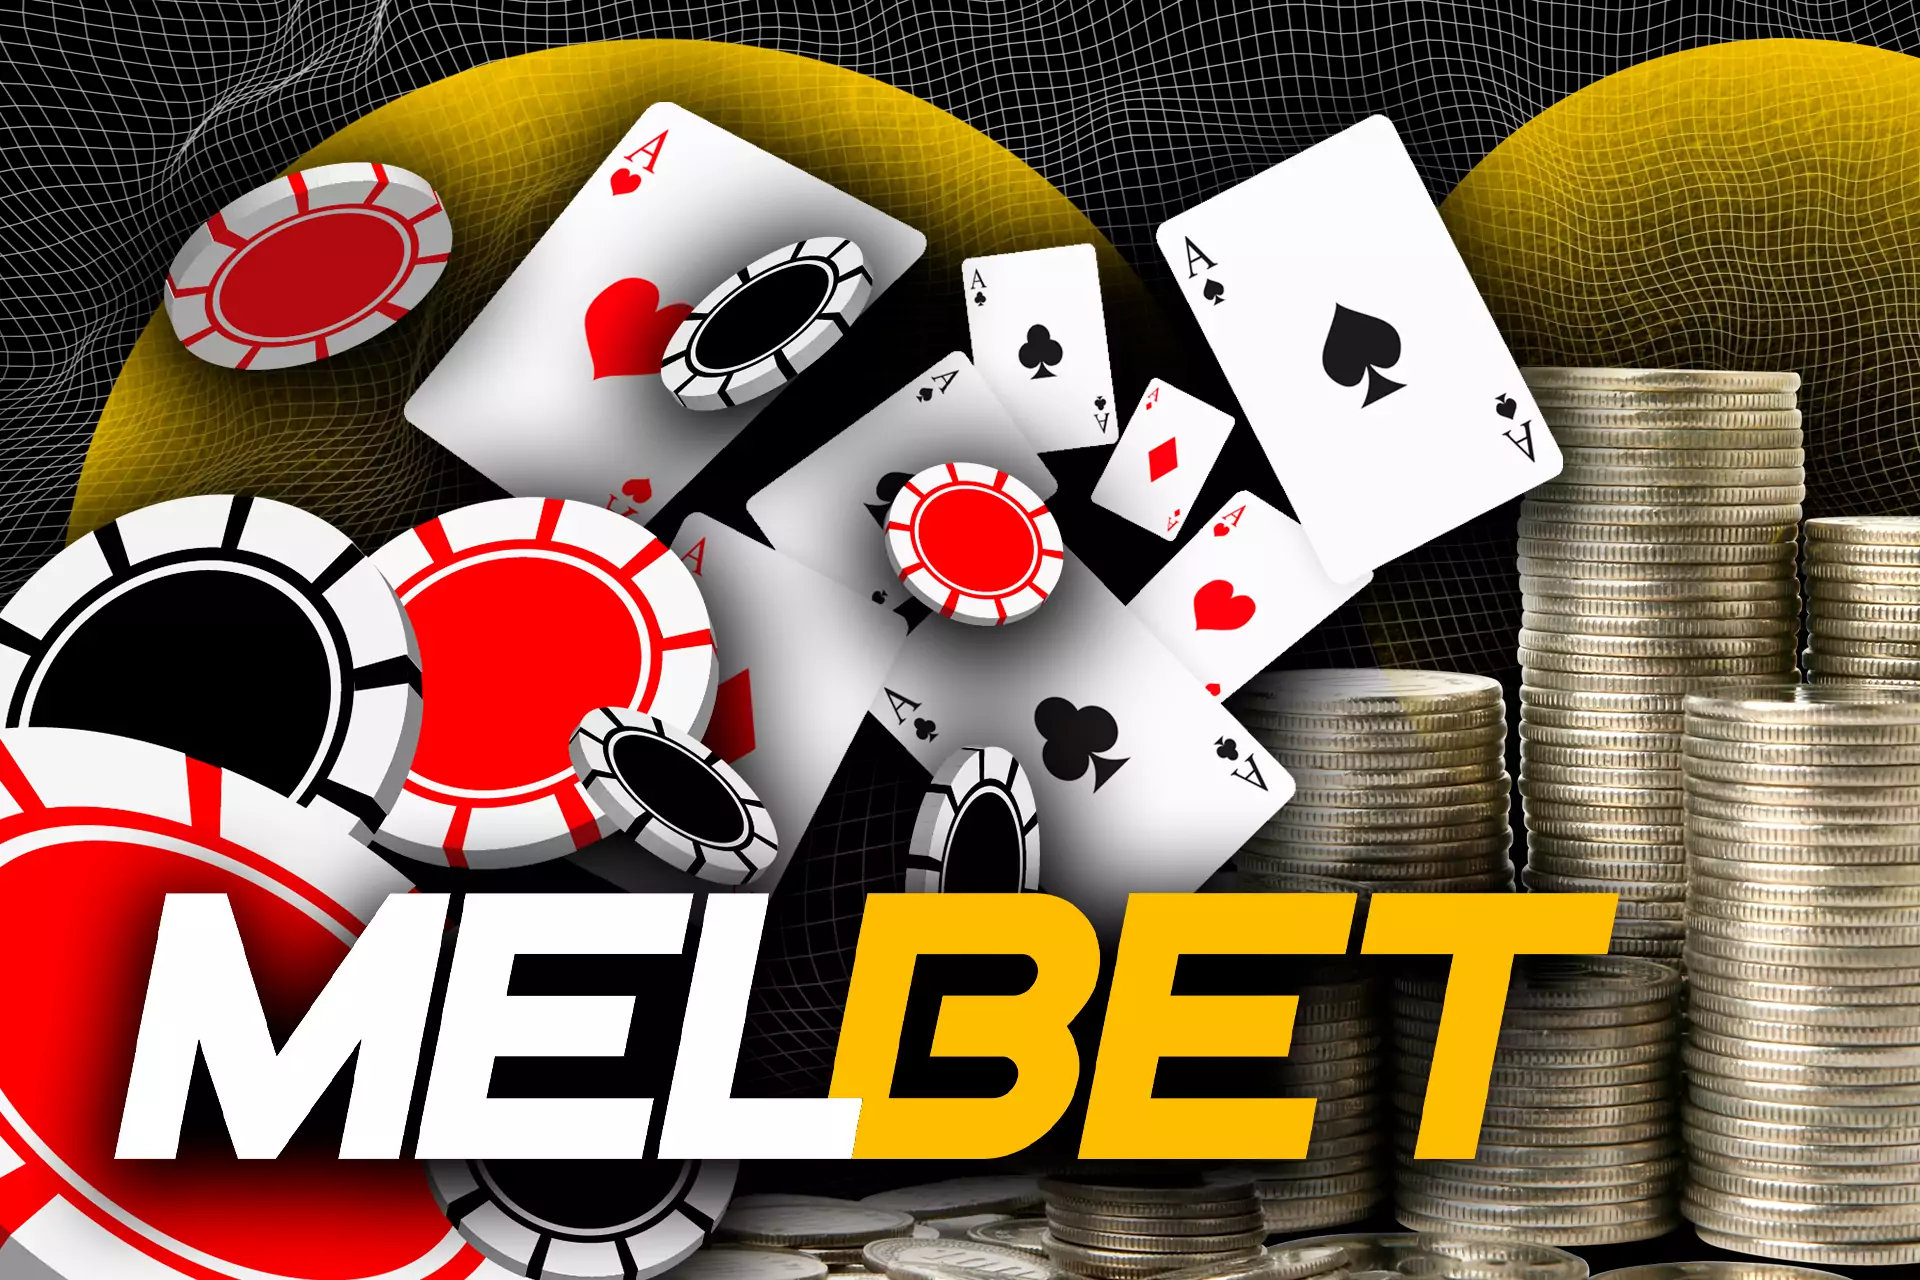 At Melbet, you can not only bet on sports but play slots and table casino games.